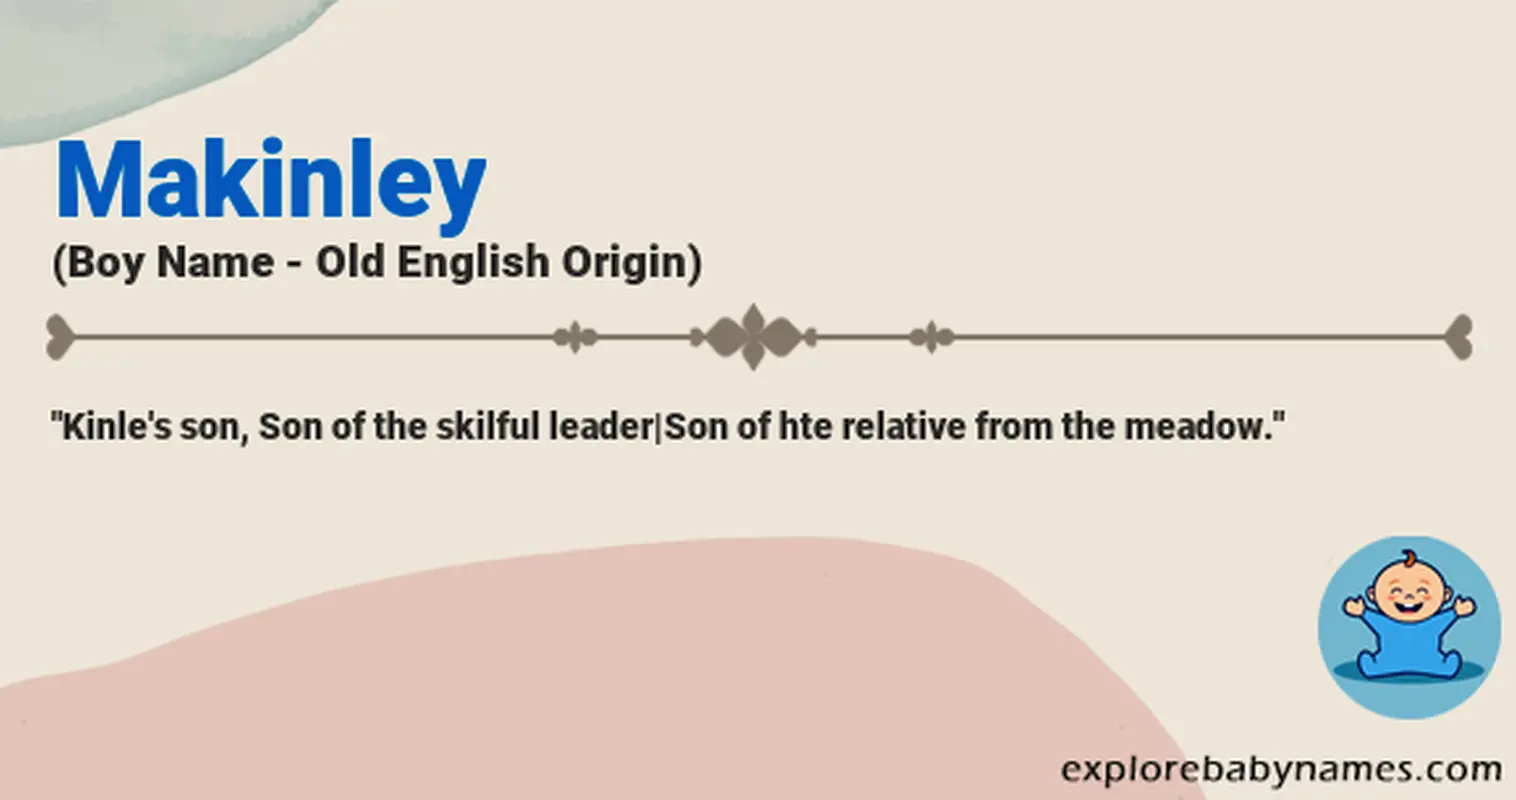 Meaning of Makinley